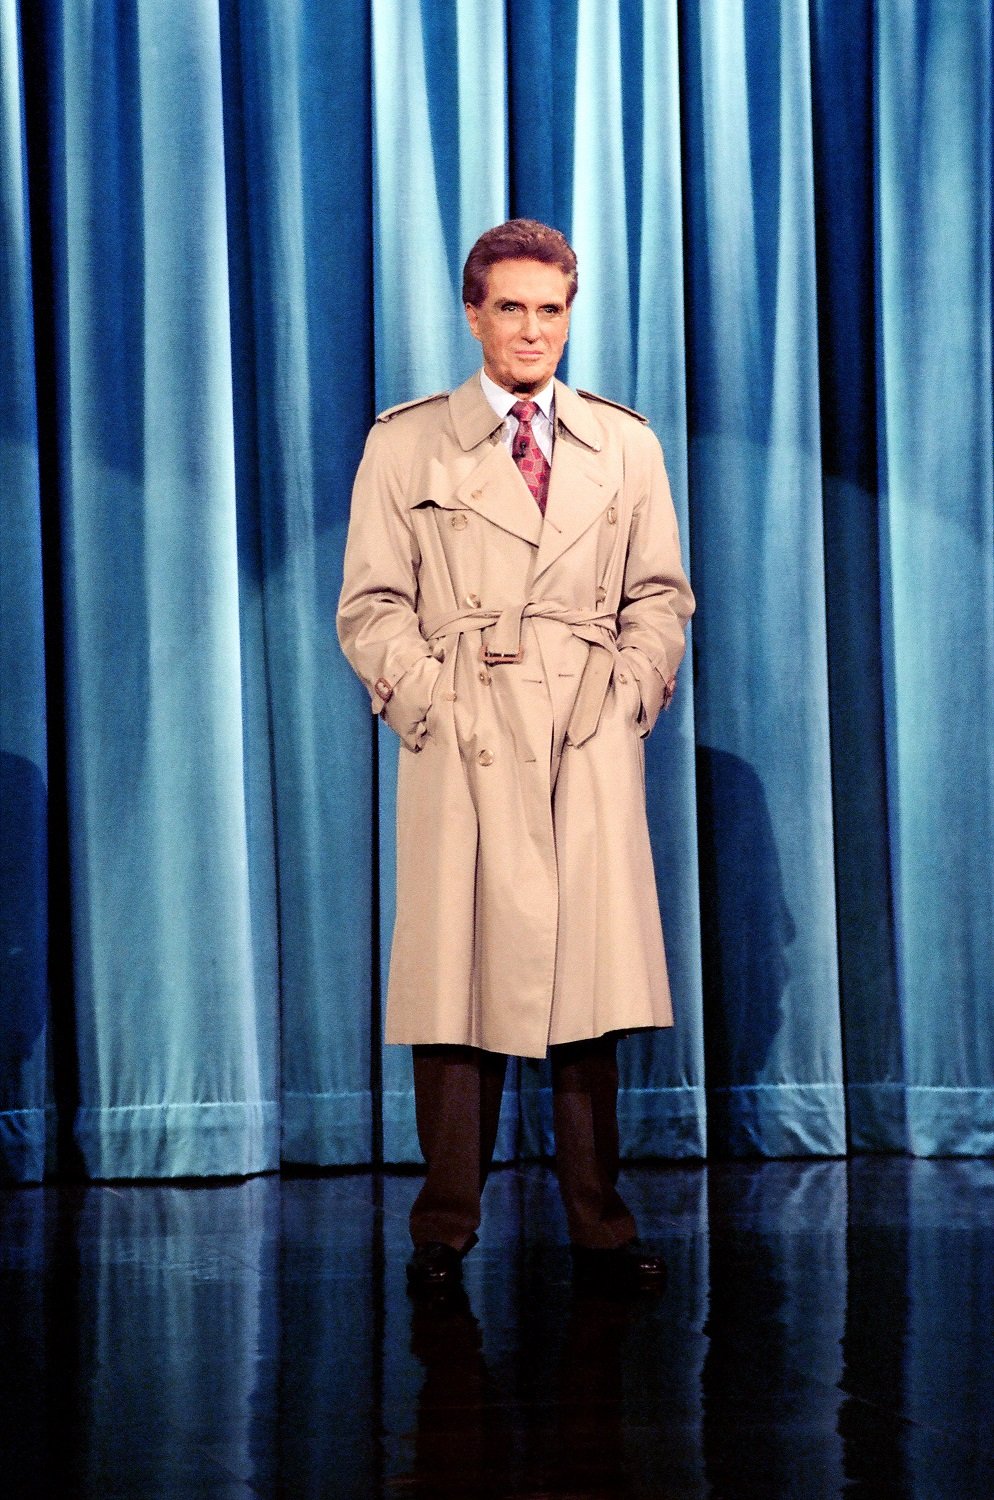 Robert Stack, the host of 'Unsolved Mysteries' appearin gon 'The Tonight Show with Jay Leno' in 1993